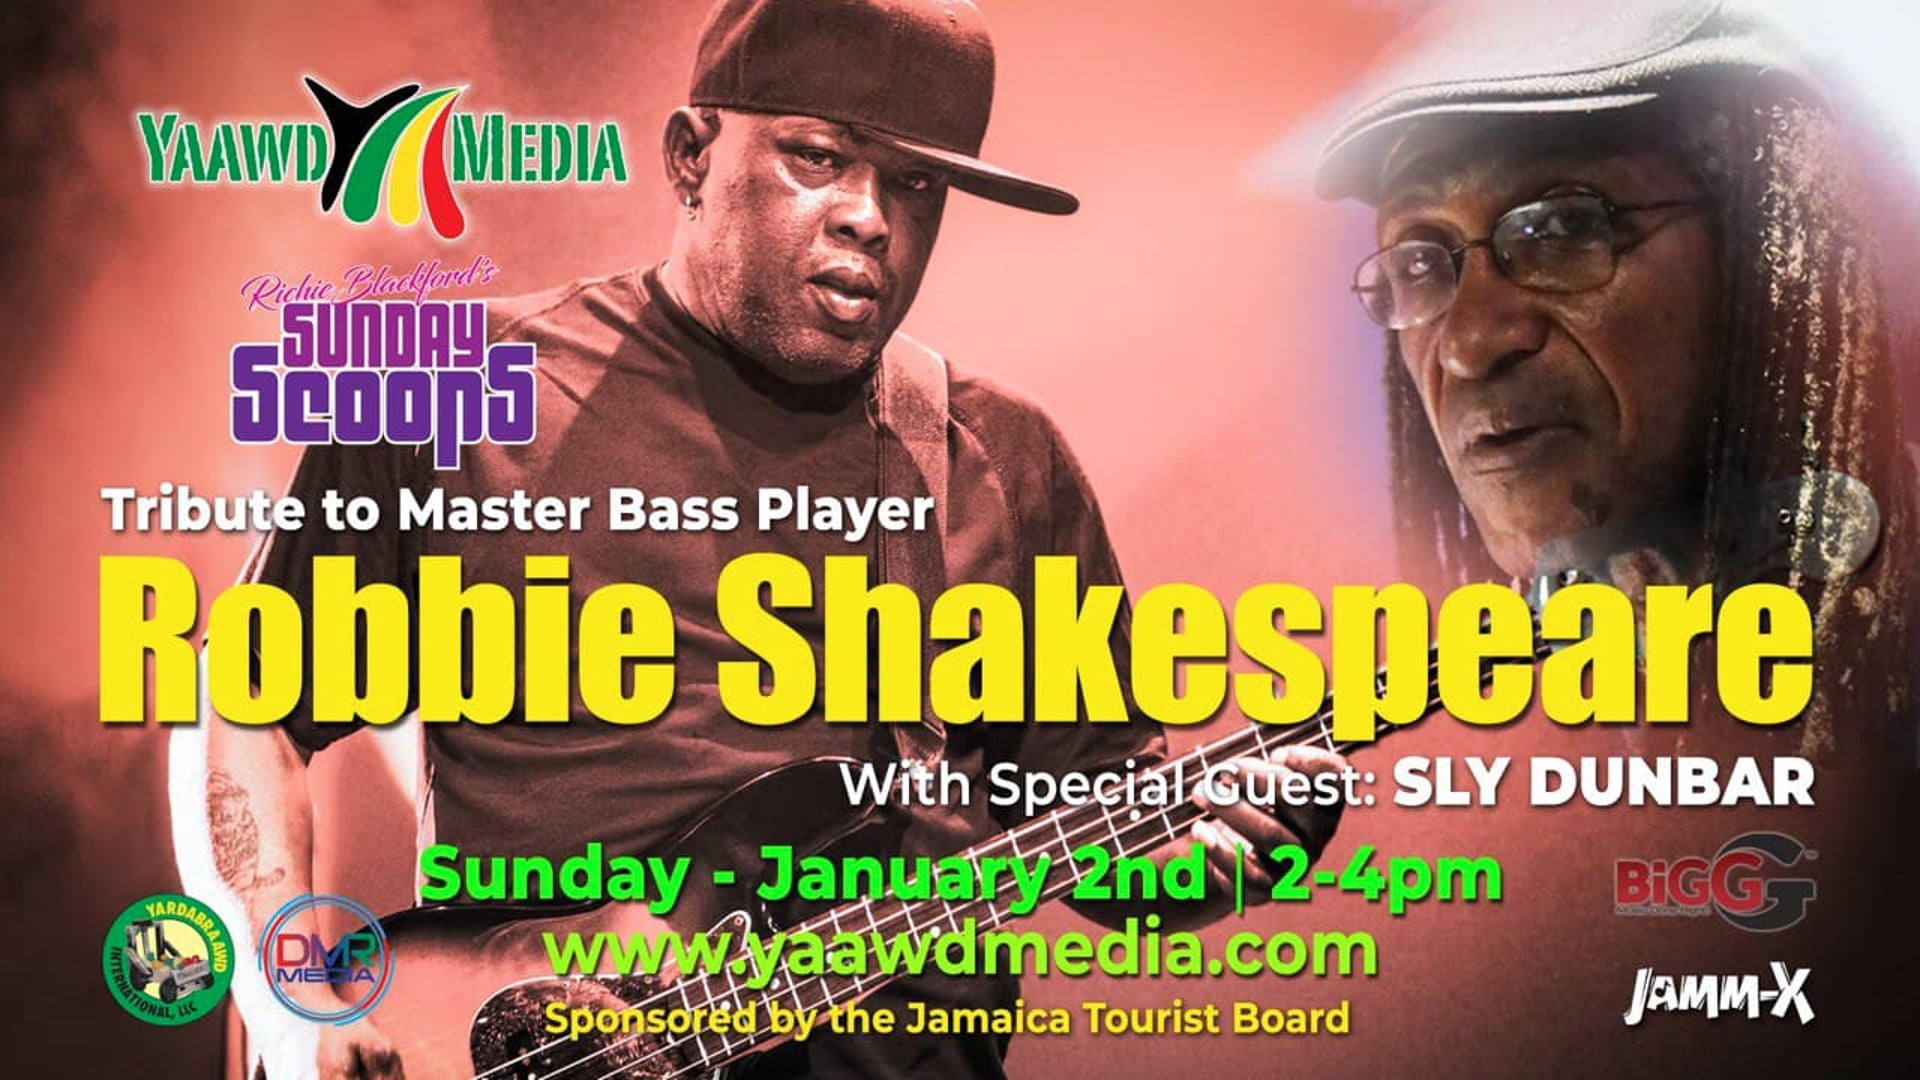 A Sunday Scoops Tribute to Robbie "Mr.Bassie" Shakespeare